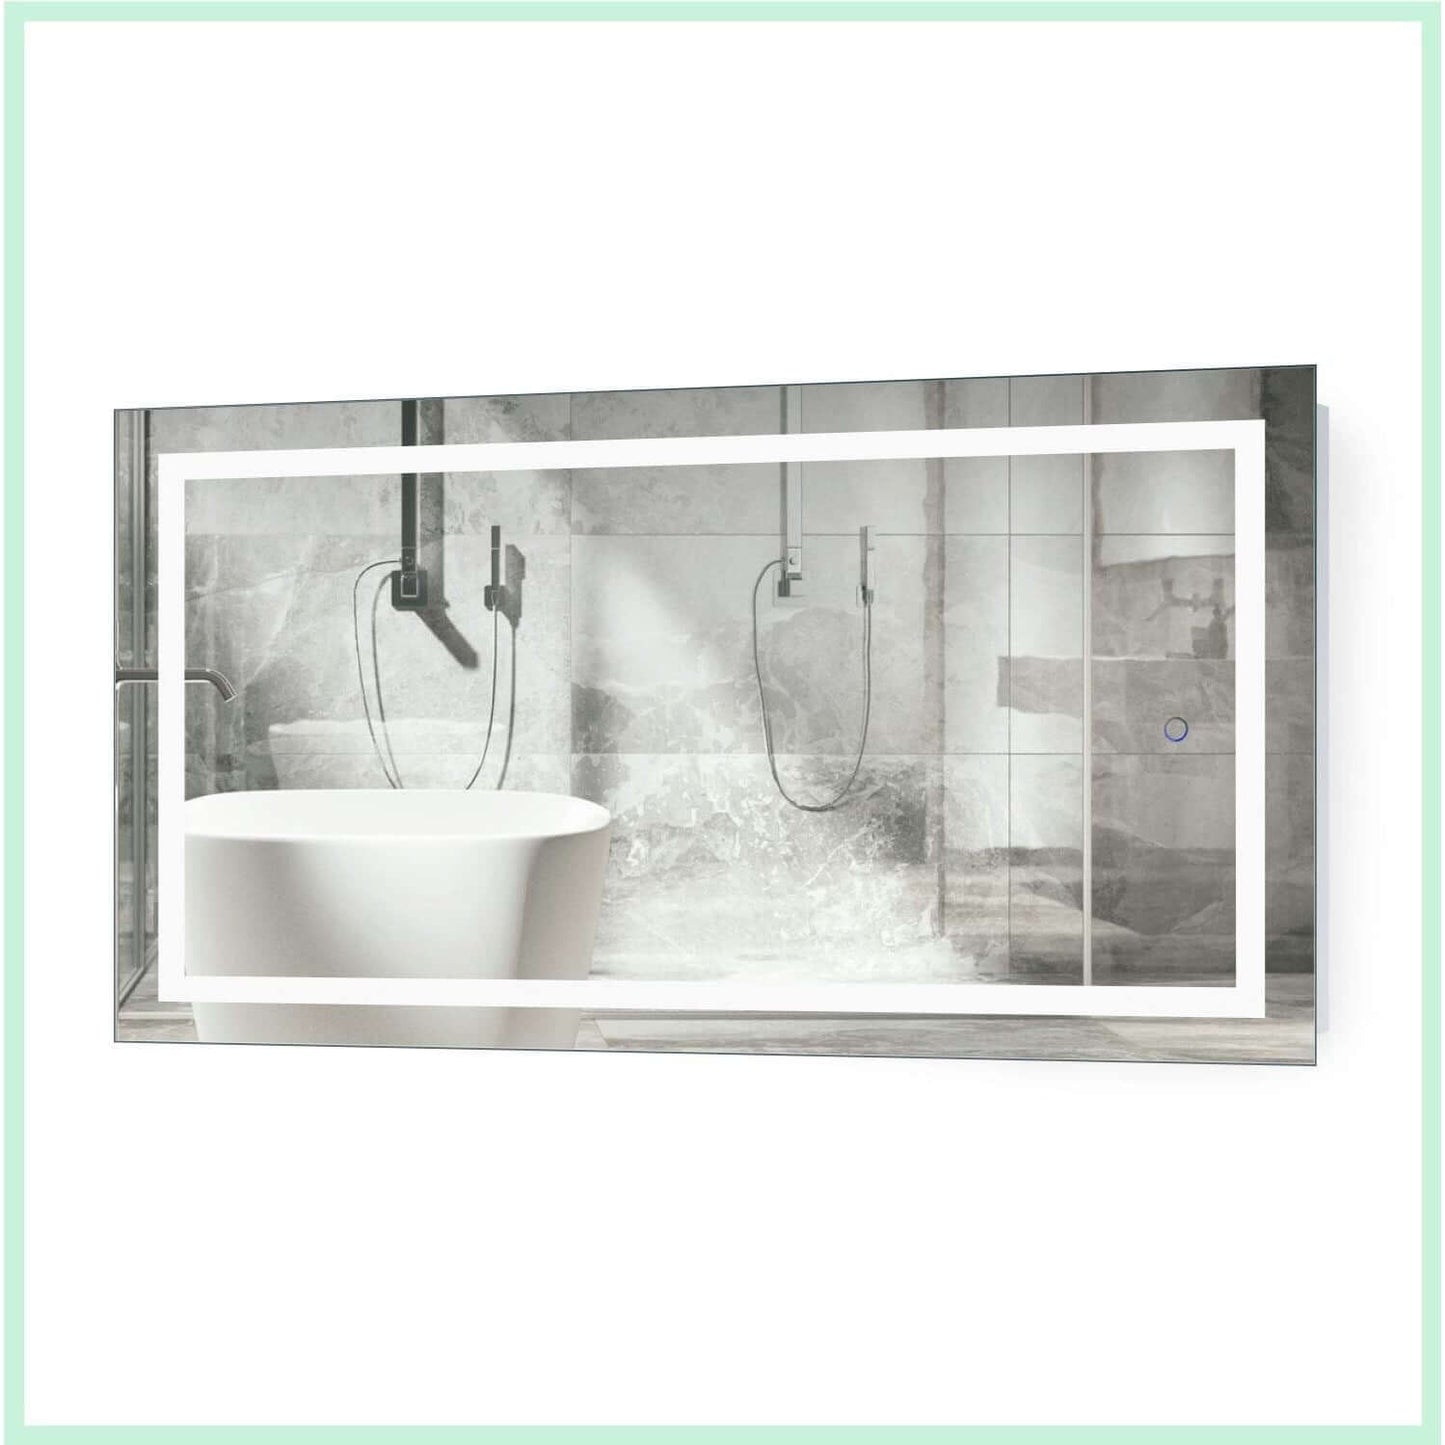 Krugg Icon 2442 LED mirror horizontally placed with a white background